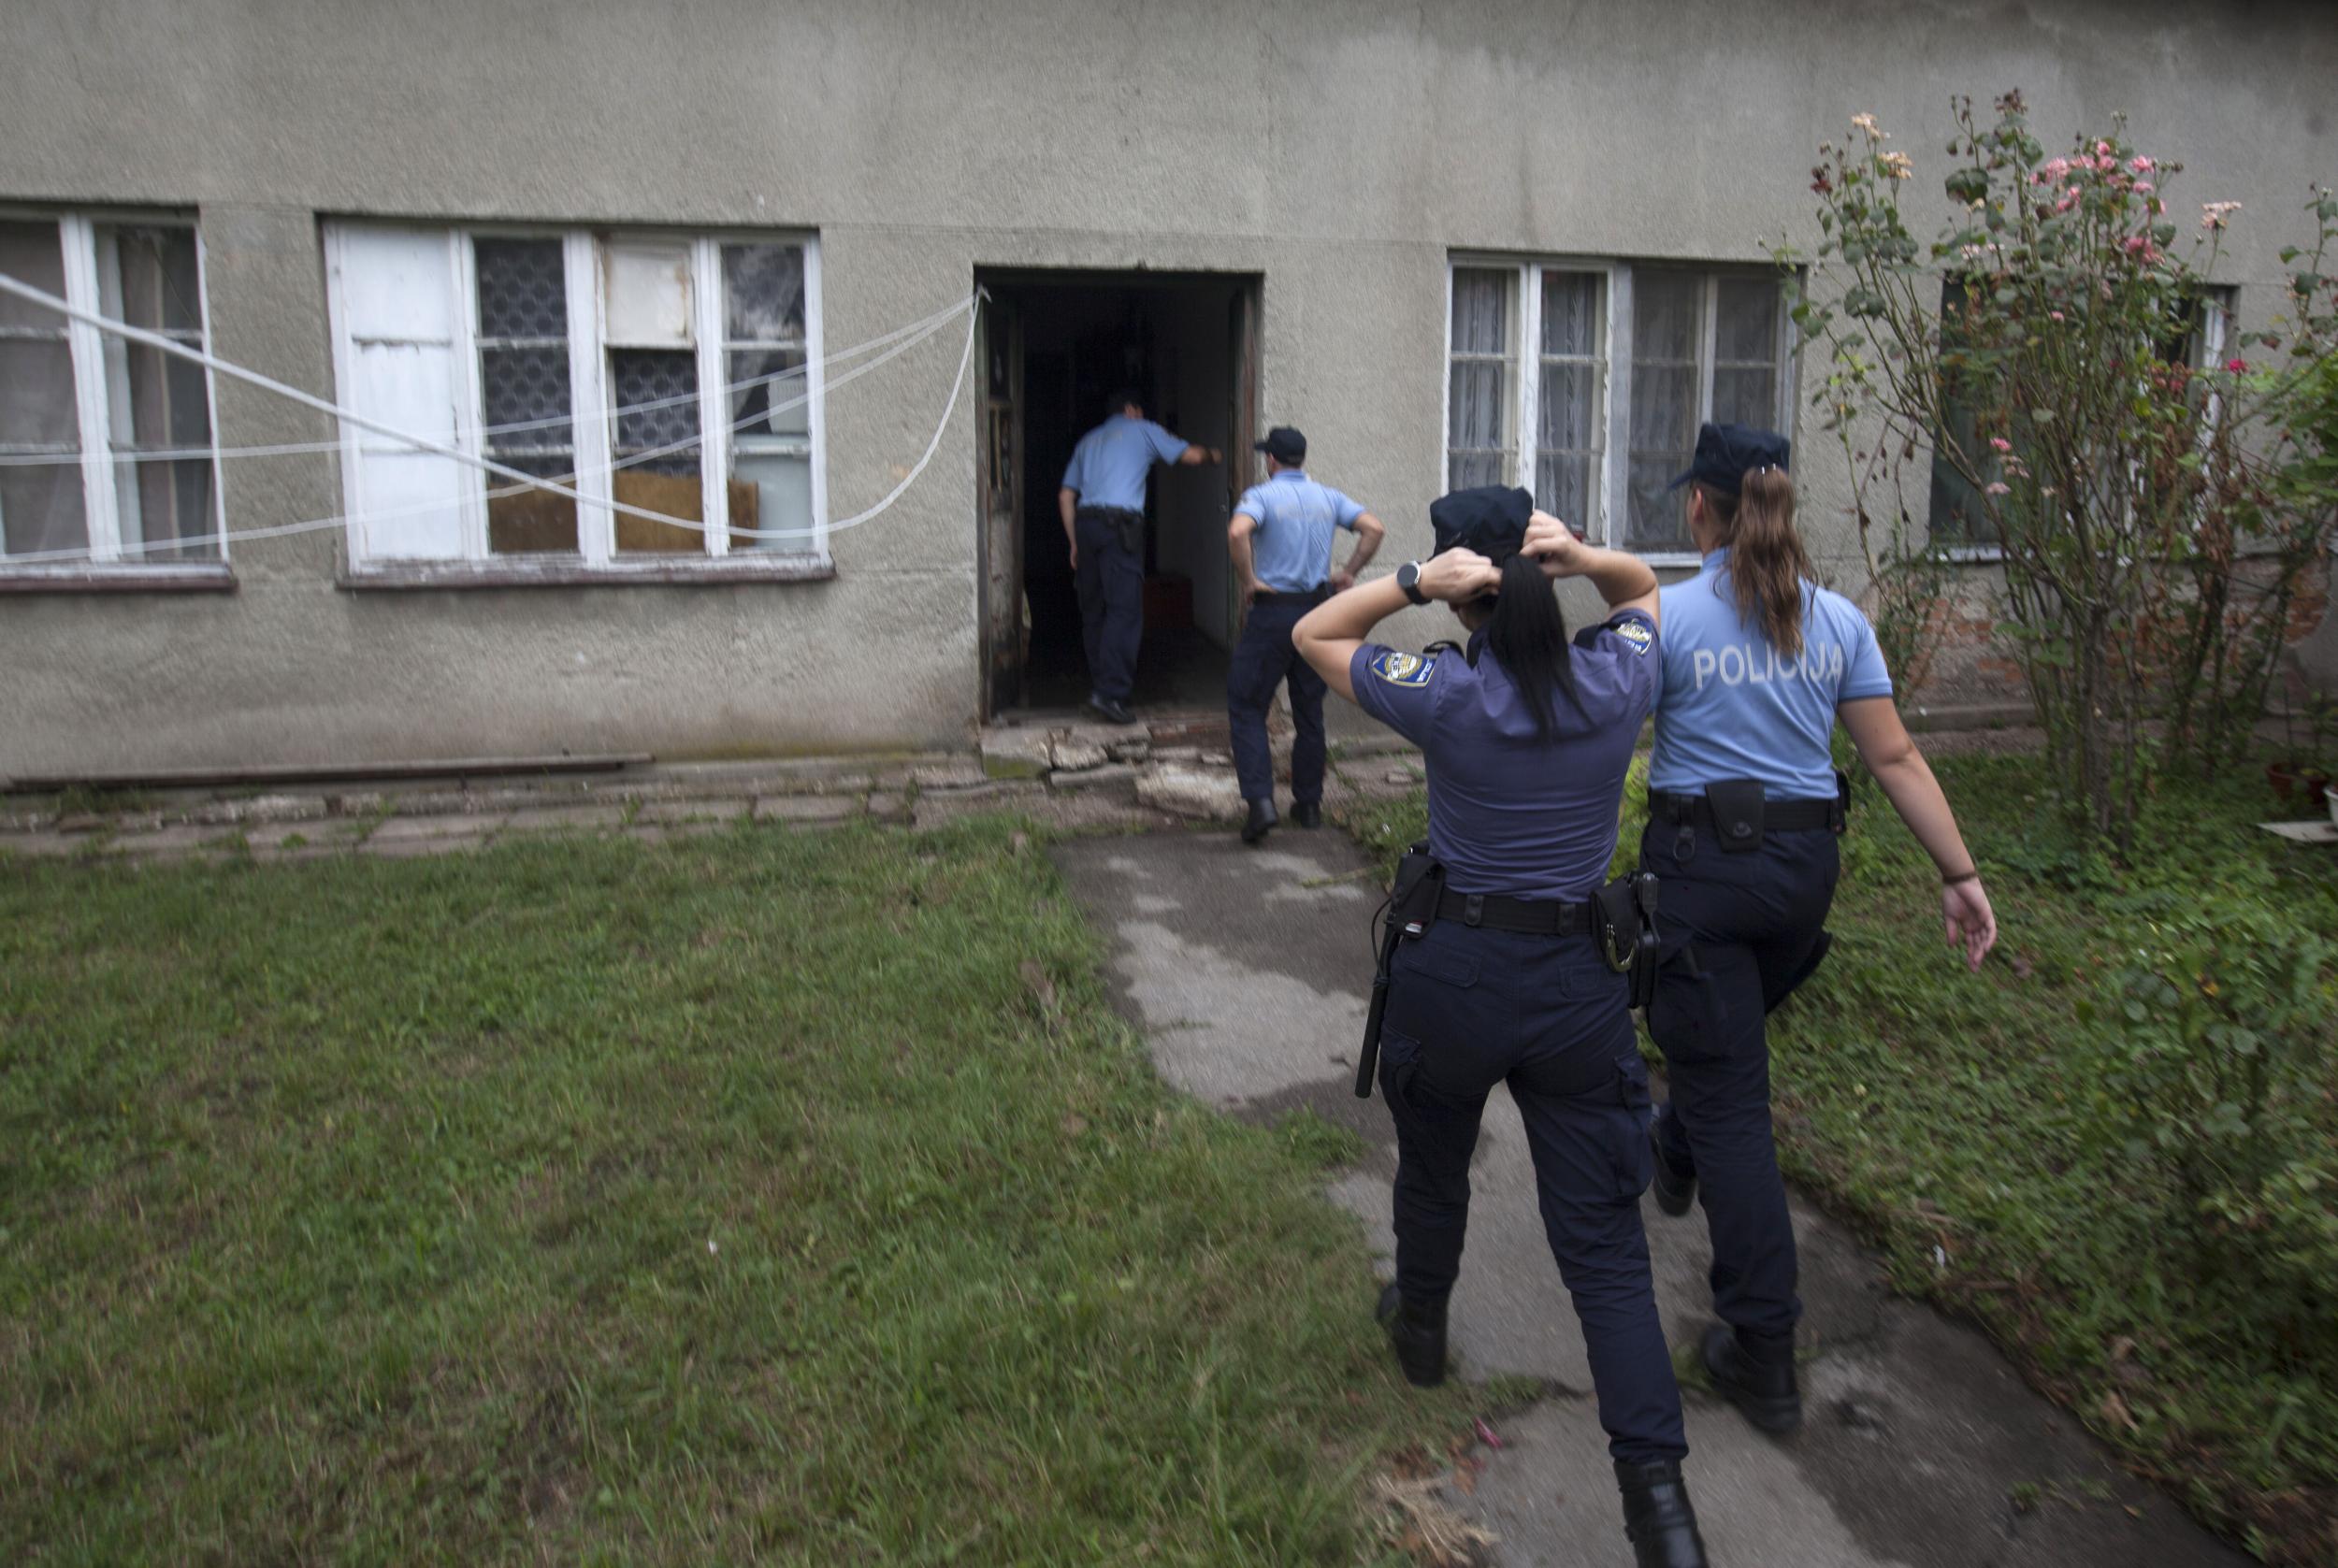 Police enter the house where a suspect killed six people, including a ten-year-old child, before committing suicide